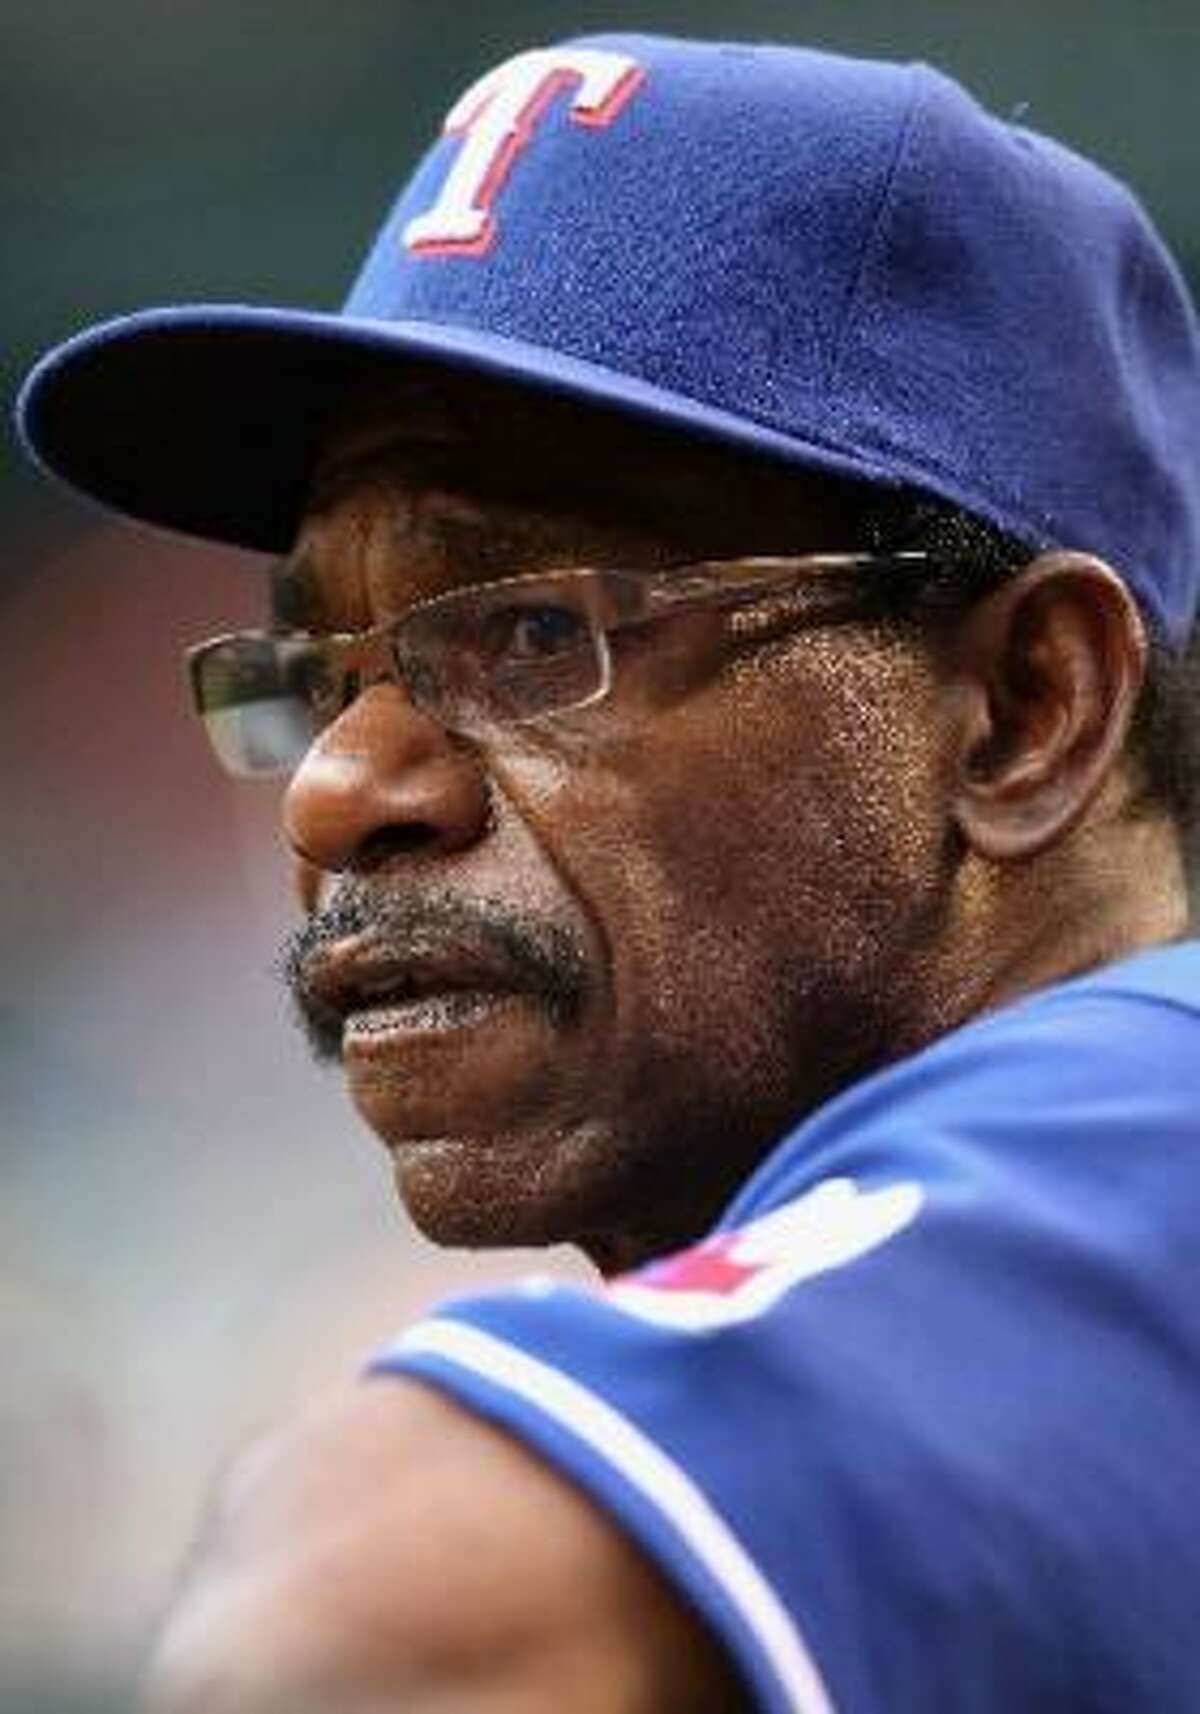 Ron Washington (Rangers) Odds: 5-2 The Rangers announced earlier this summer that they would exercise a contract option for Washington to return in 2010. Wonder if they are reconsidering after the Rangers occupied first place in the AL West for nearly two months before crumbling entering July?